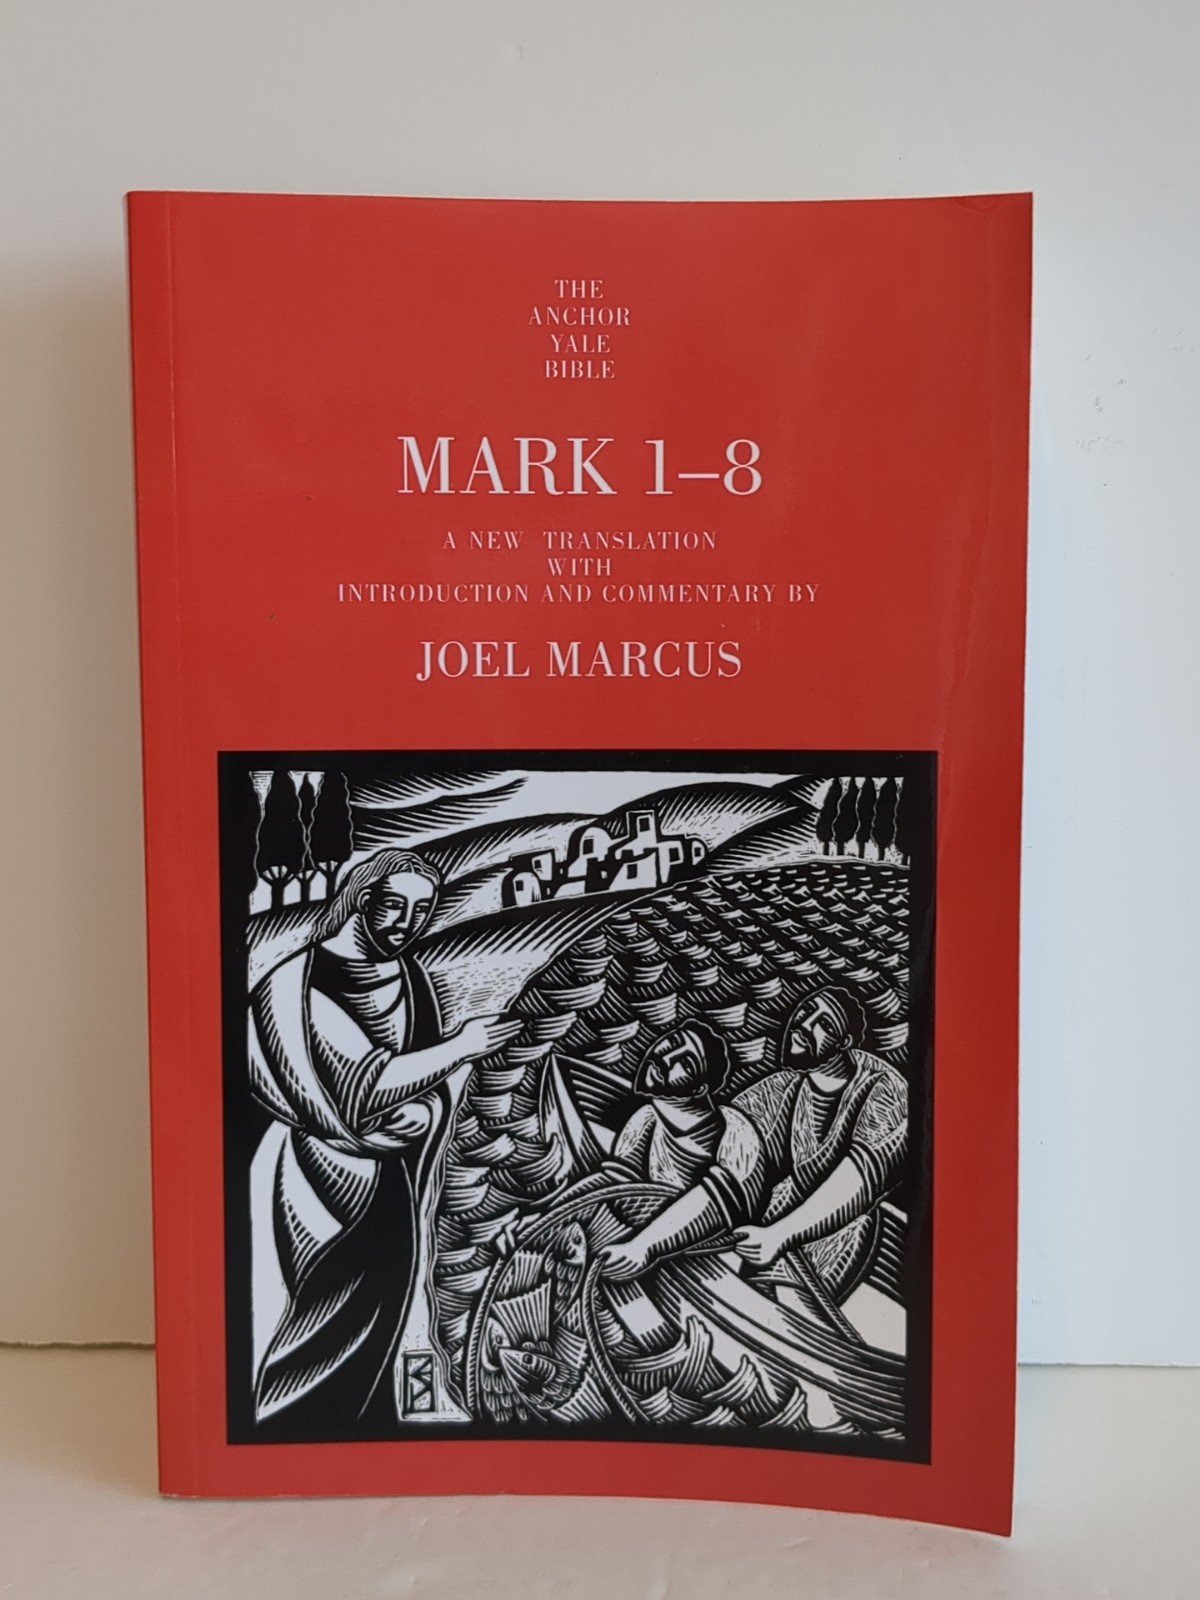 Mark 1- 8 Paperback Book The Anchor Yale Bible A New Translation by Joel Marcus gdmuUZjw8